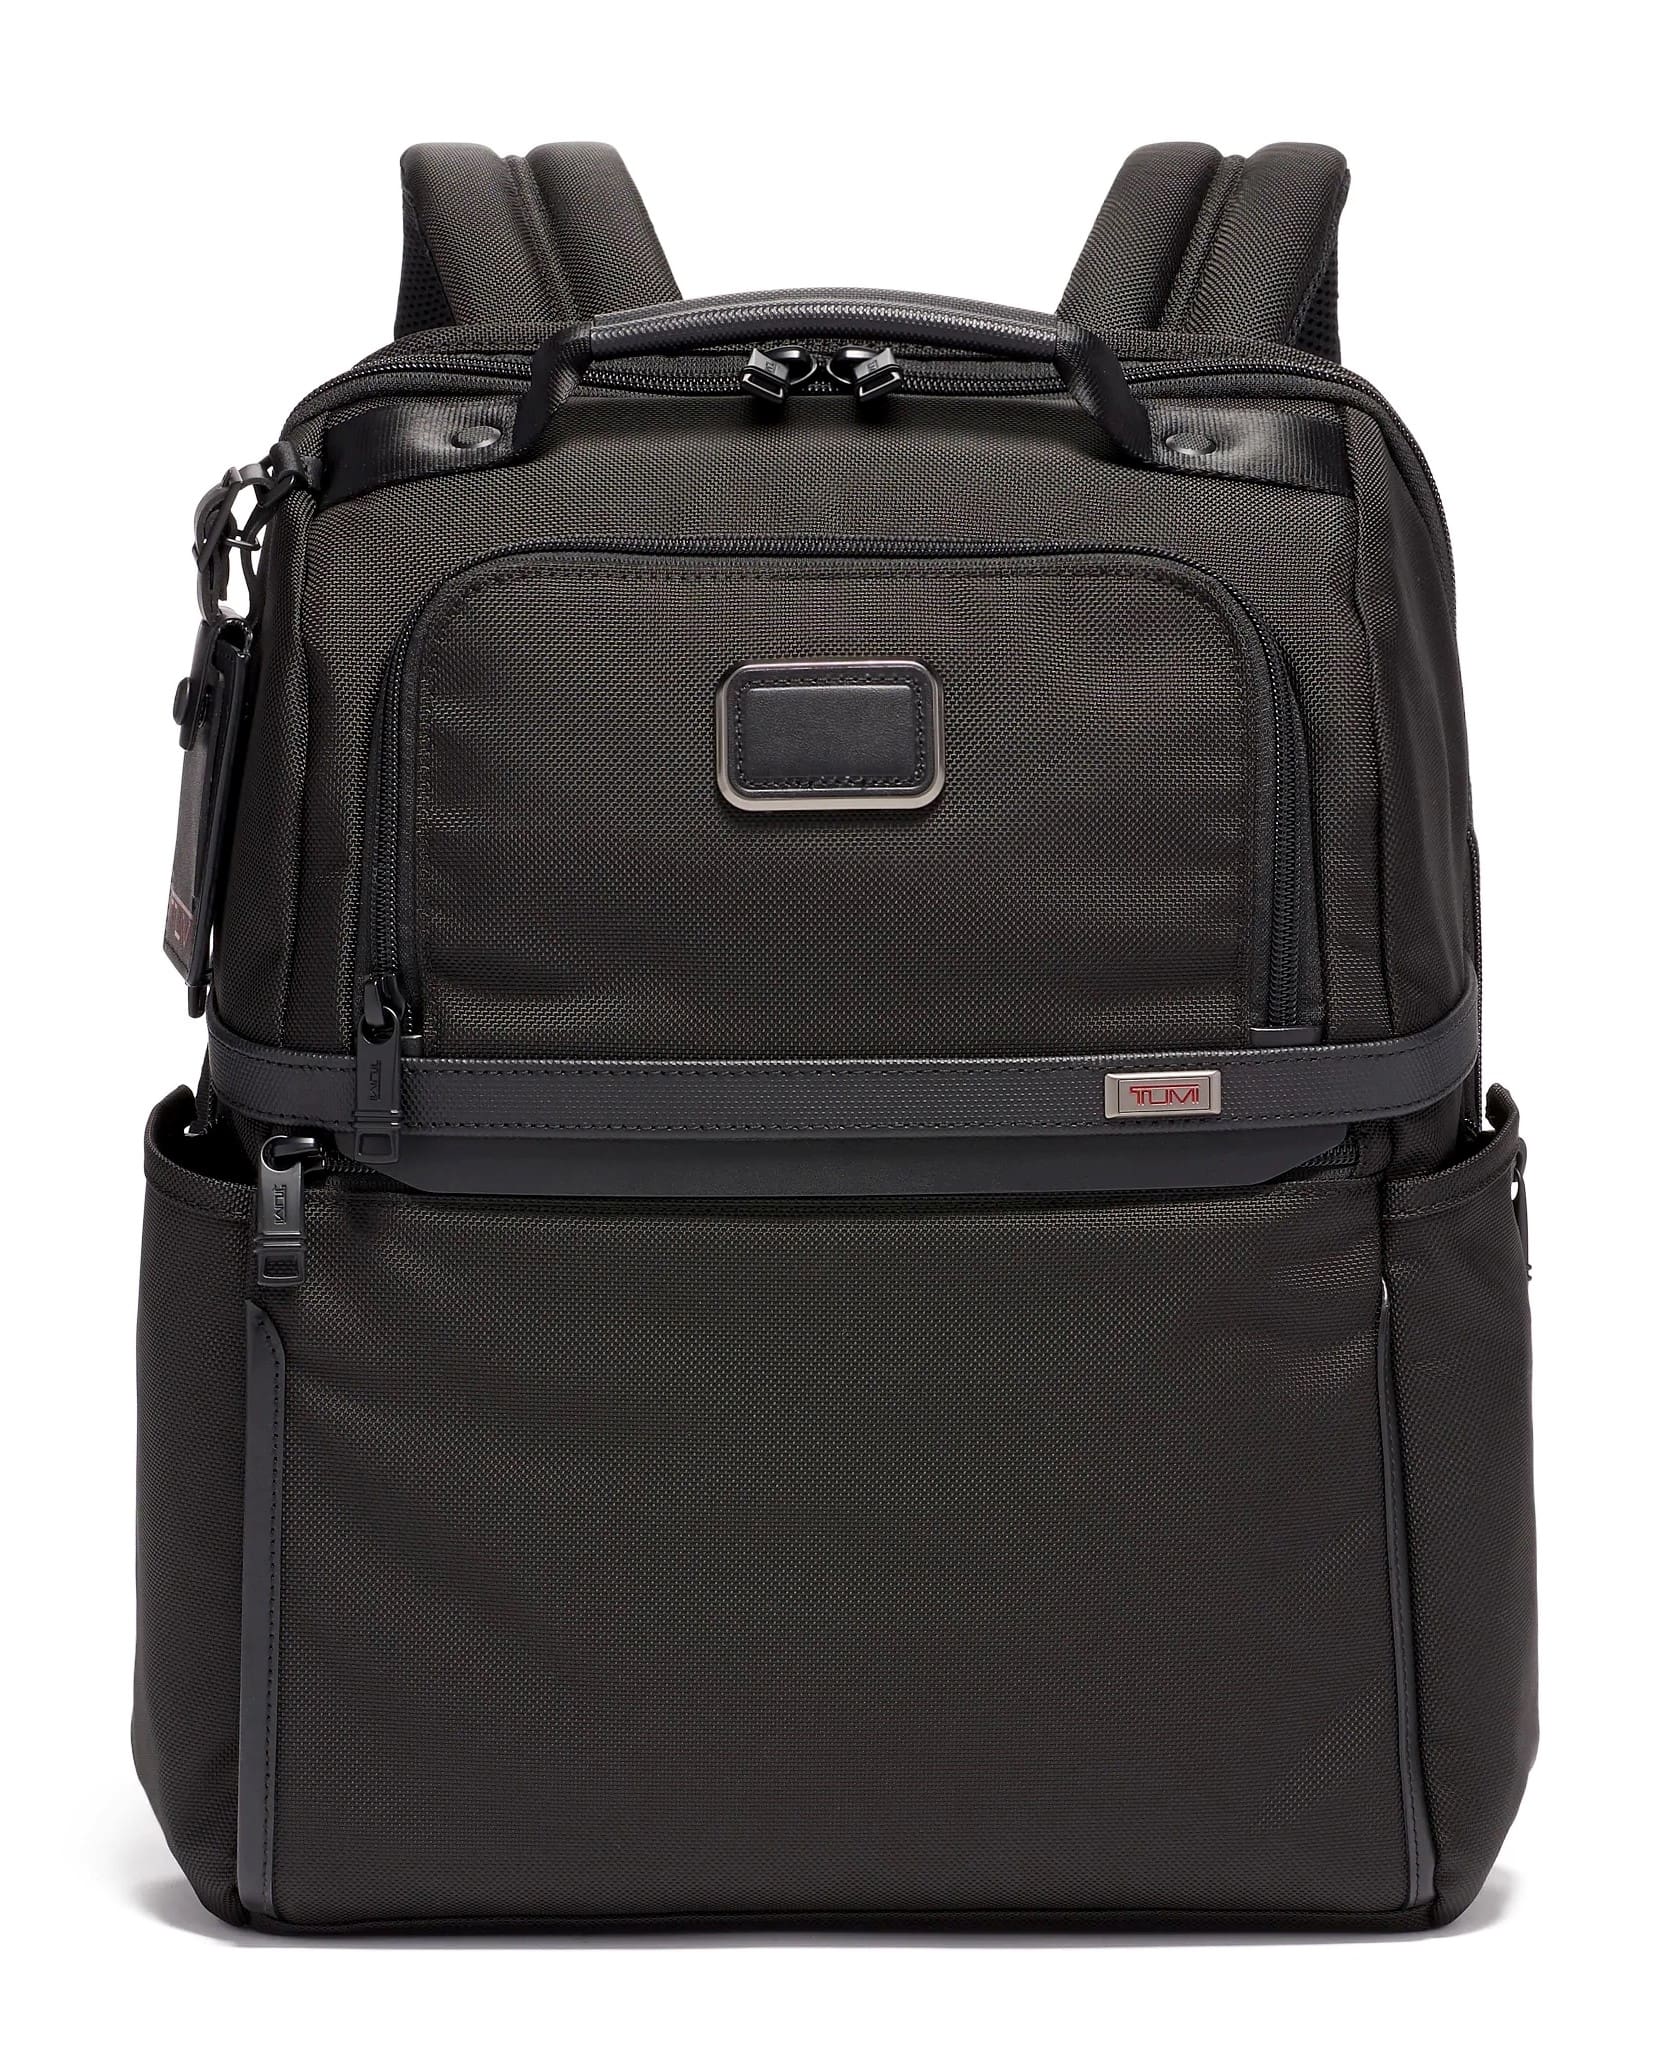 BALO LAPTOP TUMI ALPHA SLIM SOLUTIONS BRIEF PACK BACKPACK 6